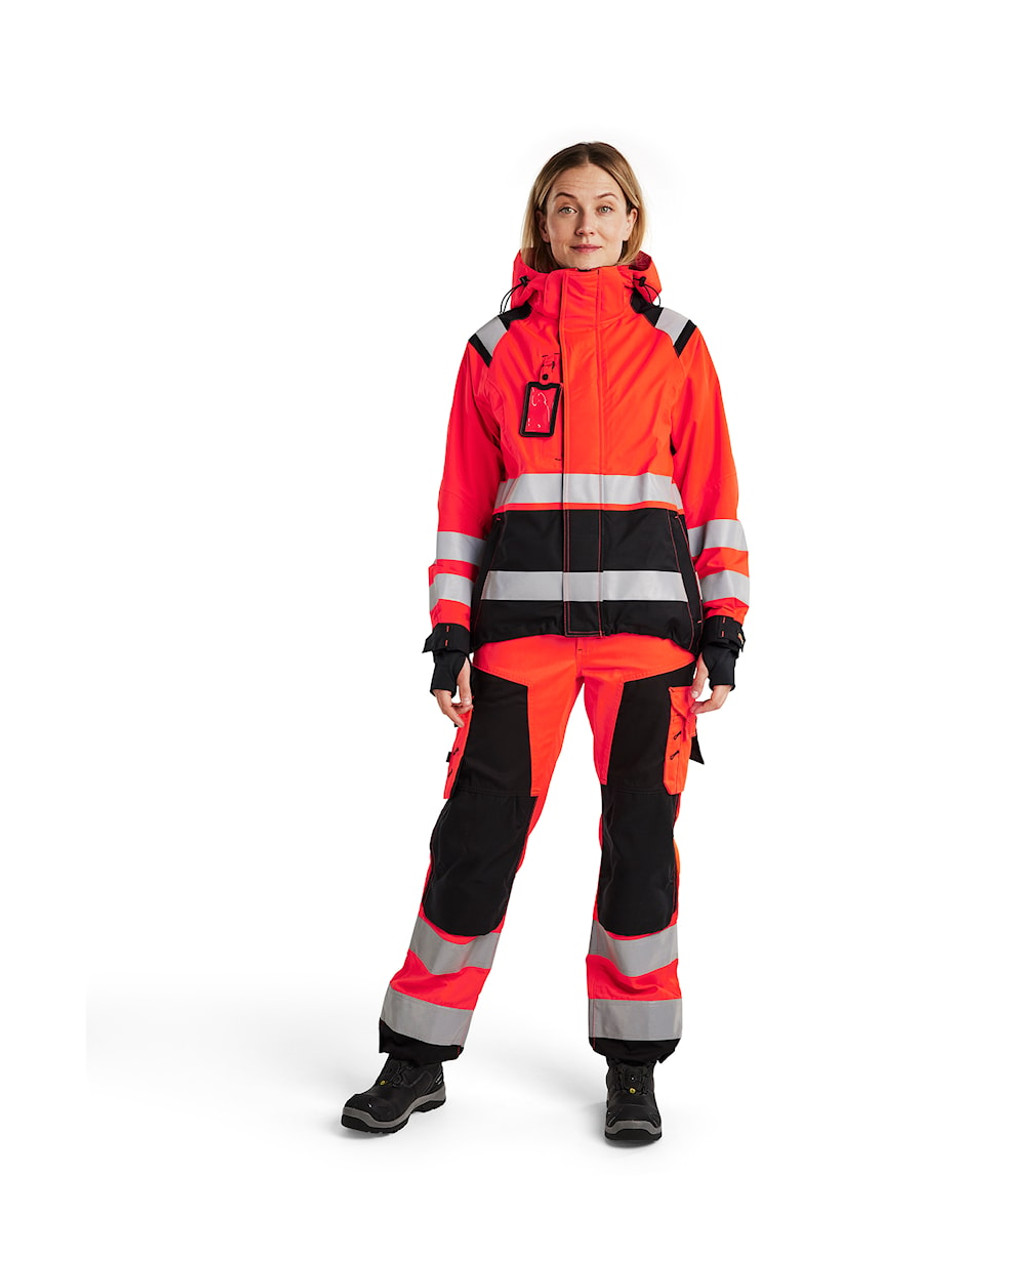 BLAKLADER Jacket | 4904 Womens High Vis Red /Black Jacket Waterproof with Reflective Tape in Polyester